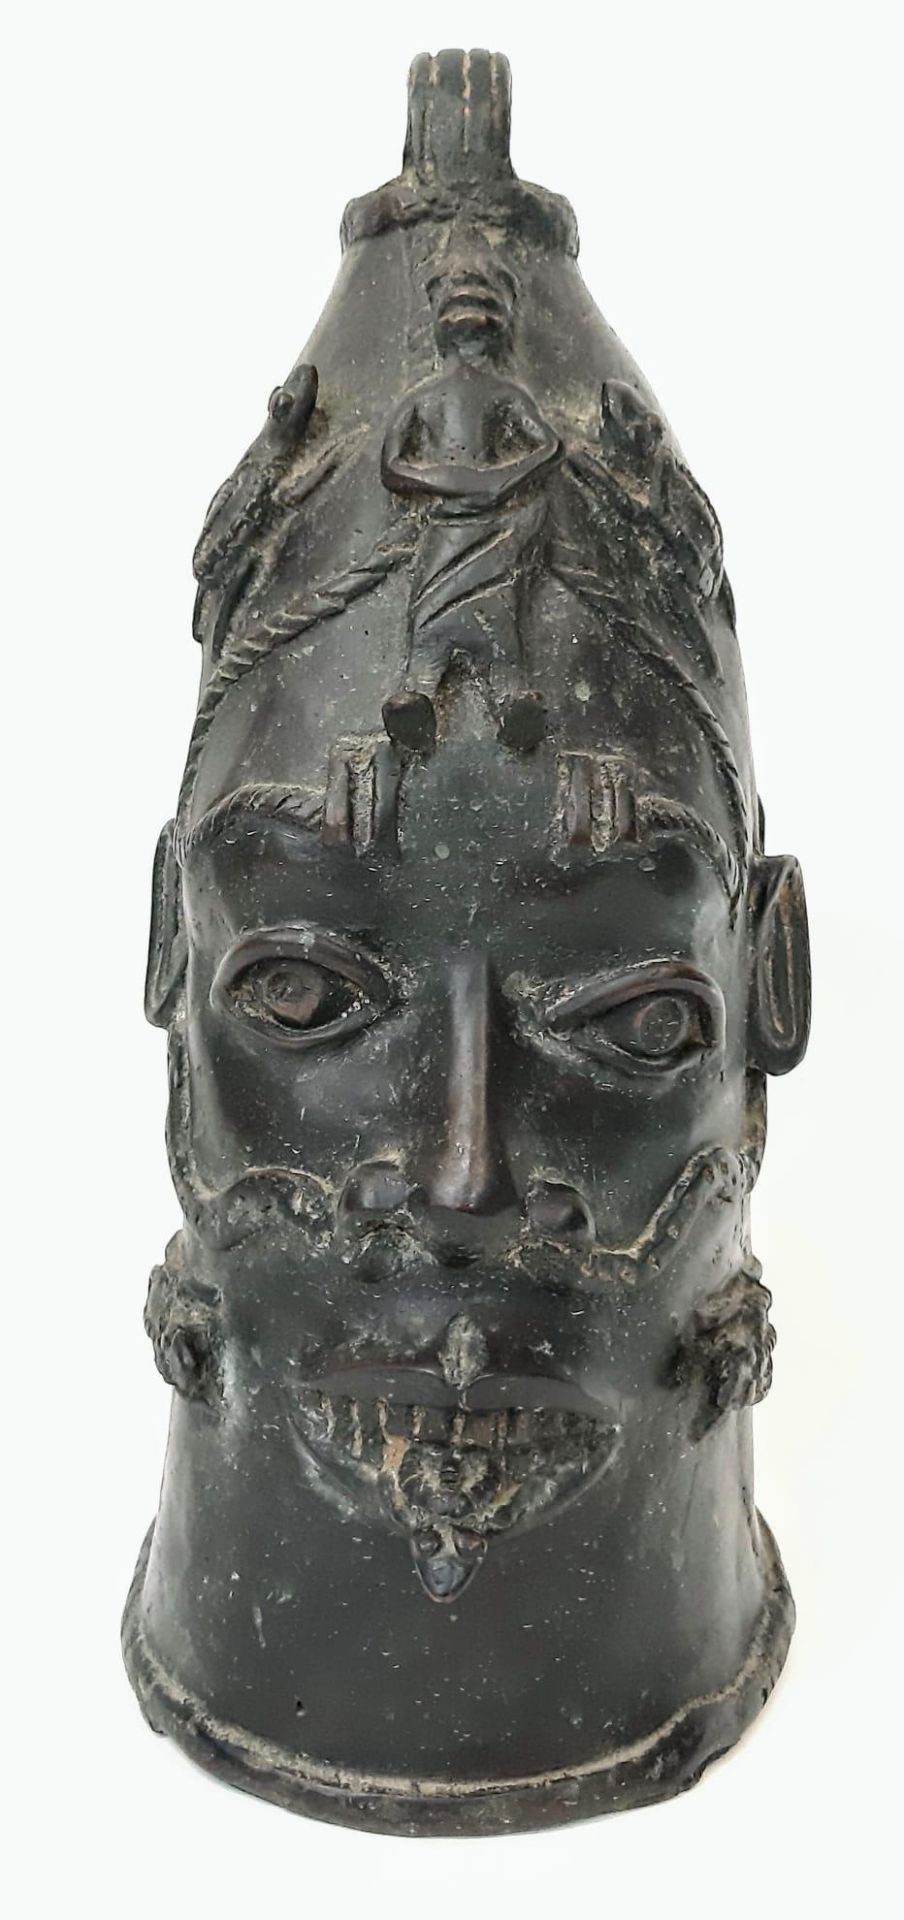 A Fascinating Antique African Tribal Head Bronze Sculpture. Possibly a commemorative head of a